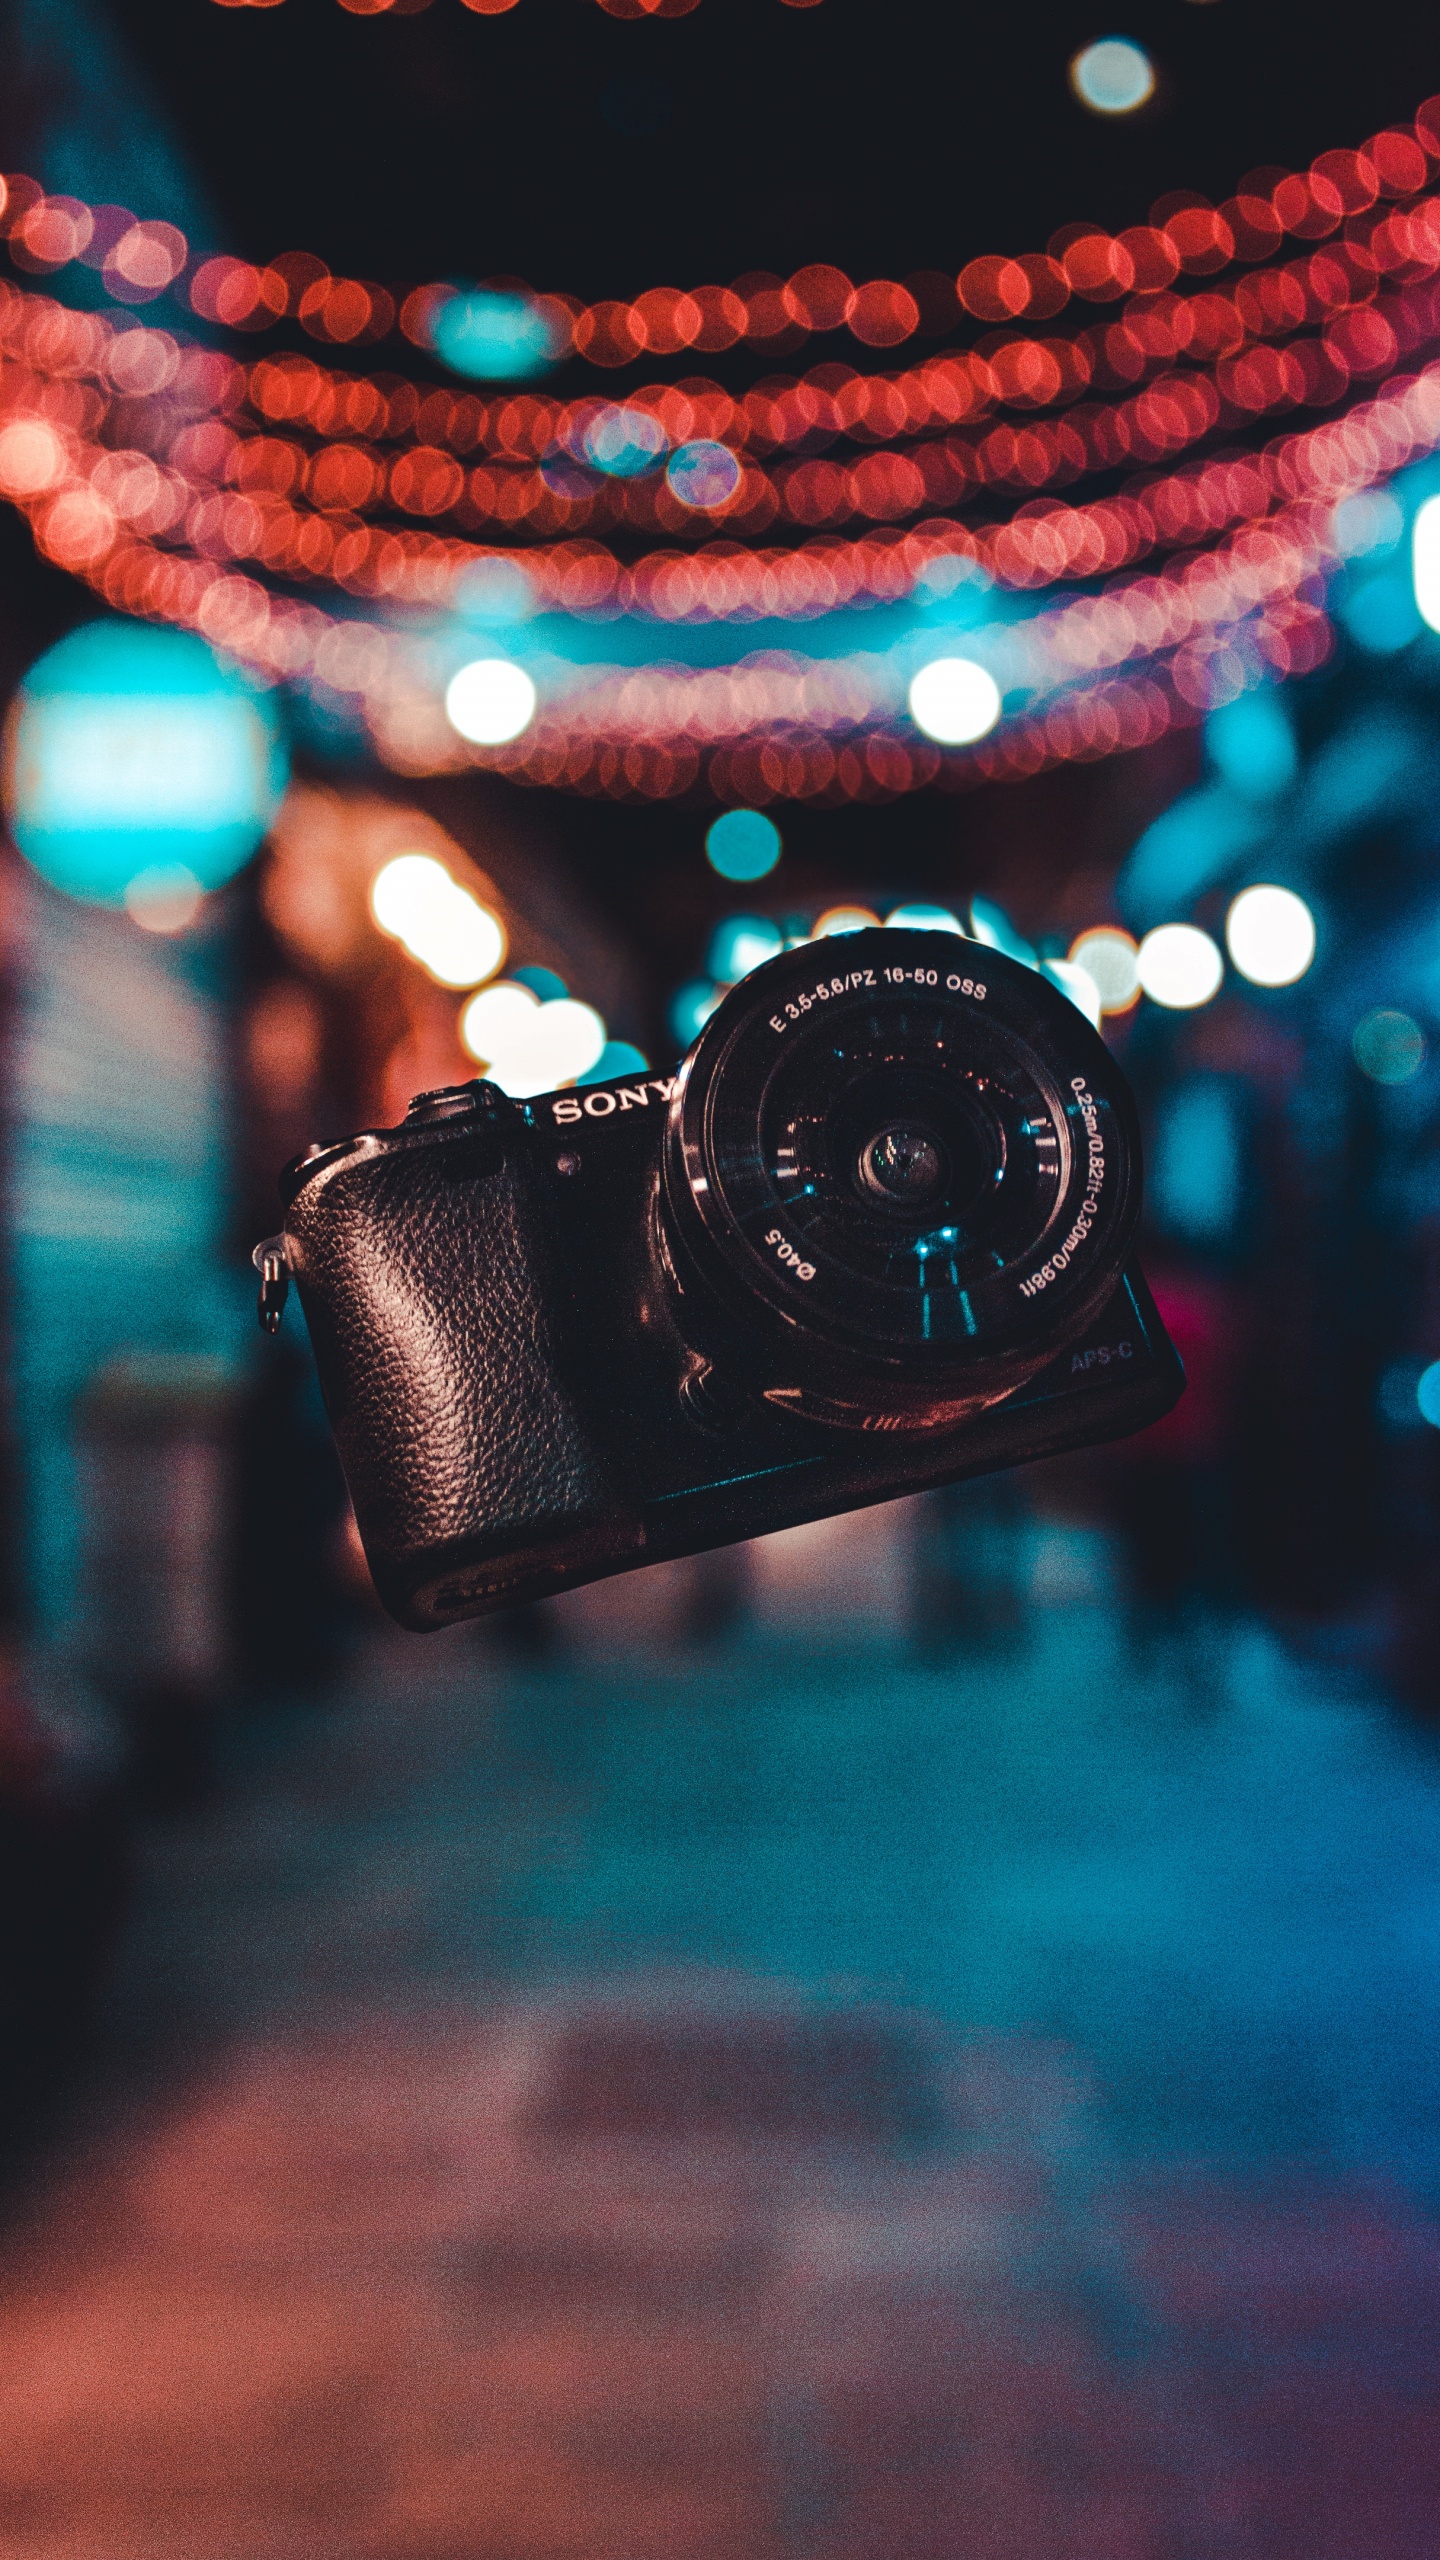 Black Dslr Camera on Blue and White String Lights. Wallpaper in 1440x2560 Resolution